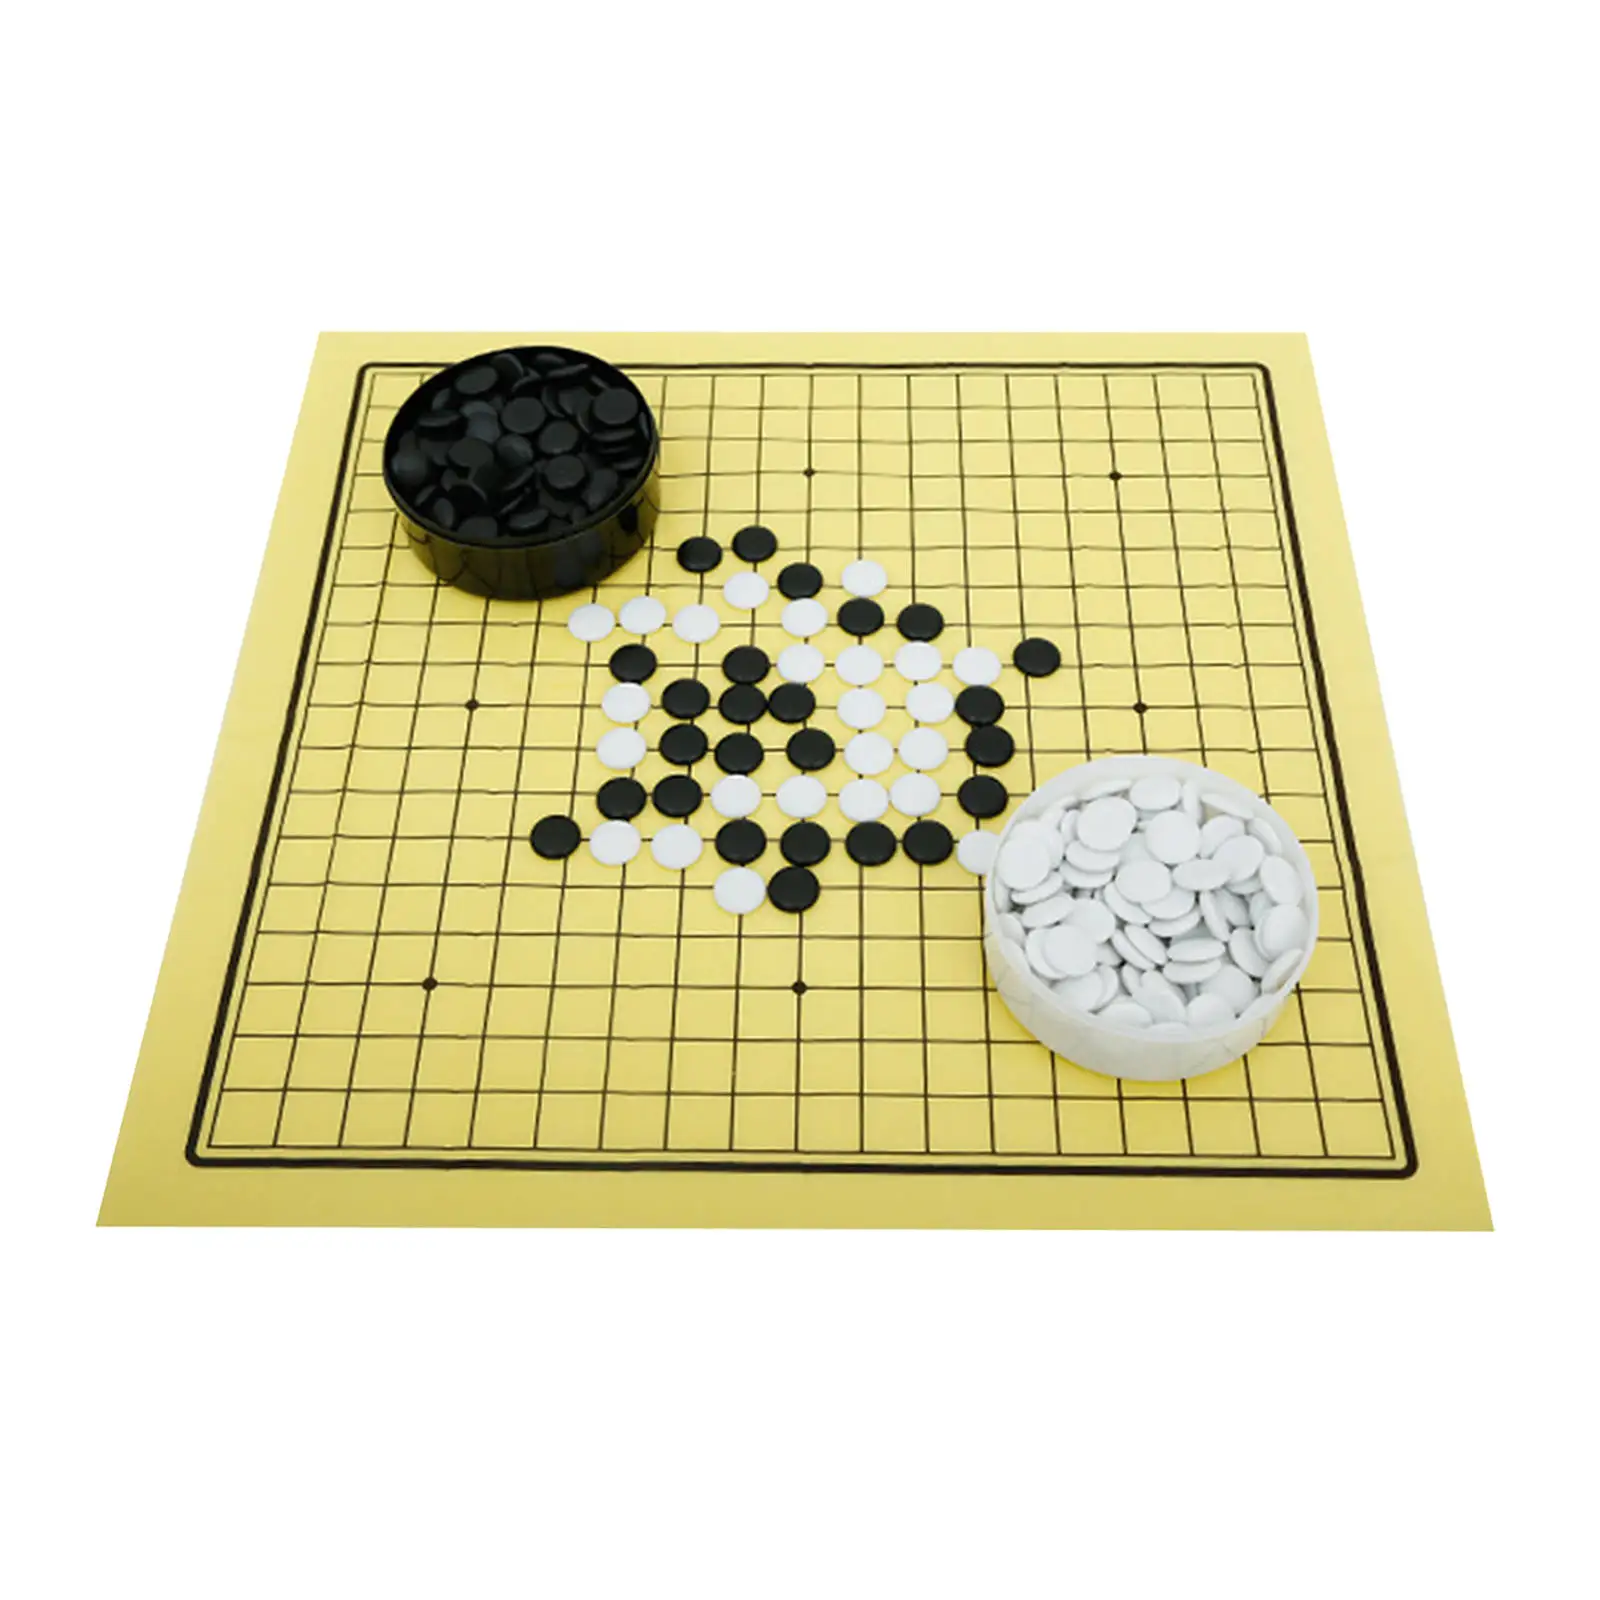 Folding Go Game Set Baduk/Weiqi 2 Player with Box Board Game Classic Strategy Games Go Set for Picnic Travel Beginner Adults